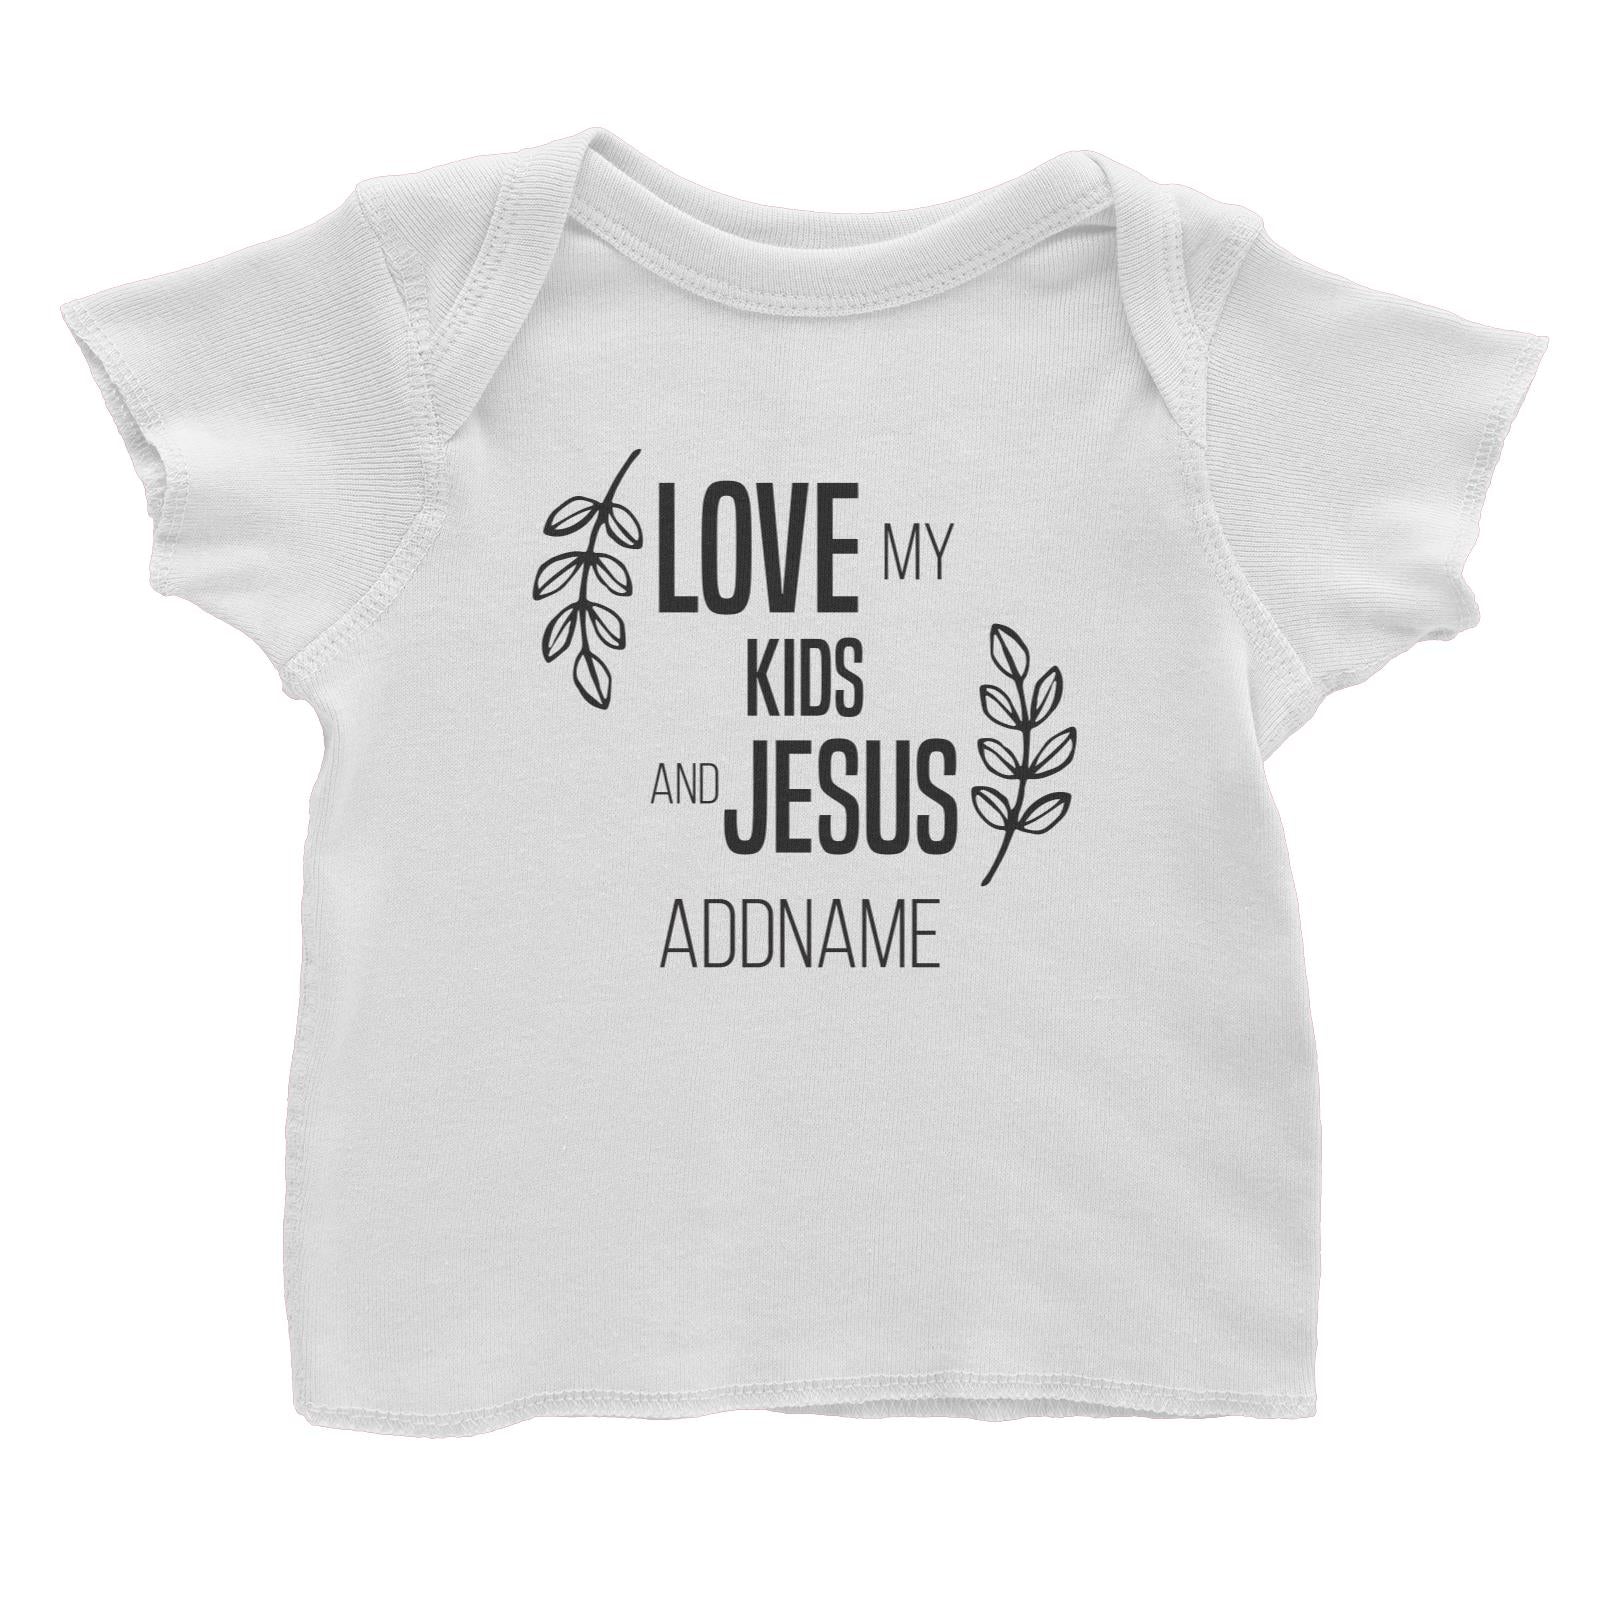 Christian Series Love My Kids And Jesus Addname Baby T-Shirt